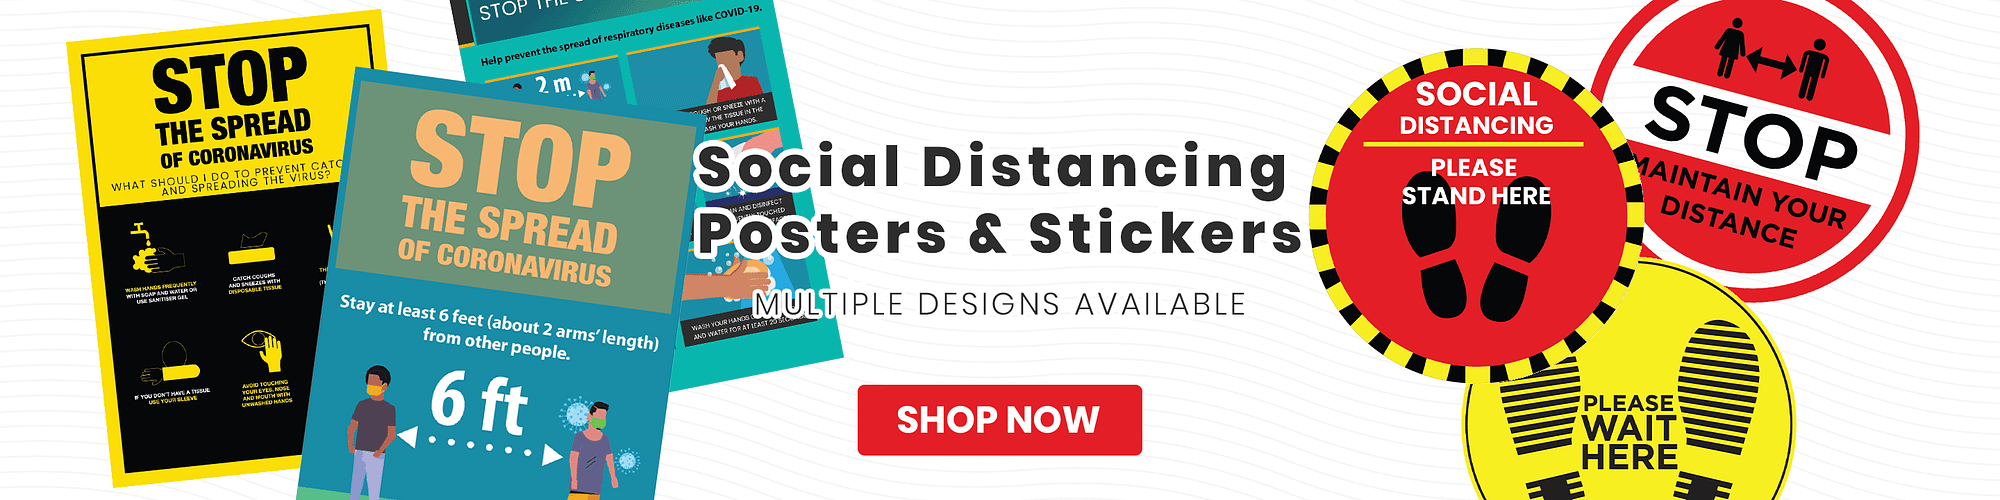 Social Distancing Posters & Stickers